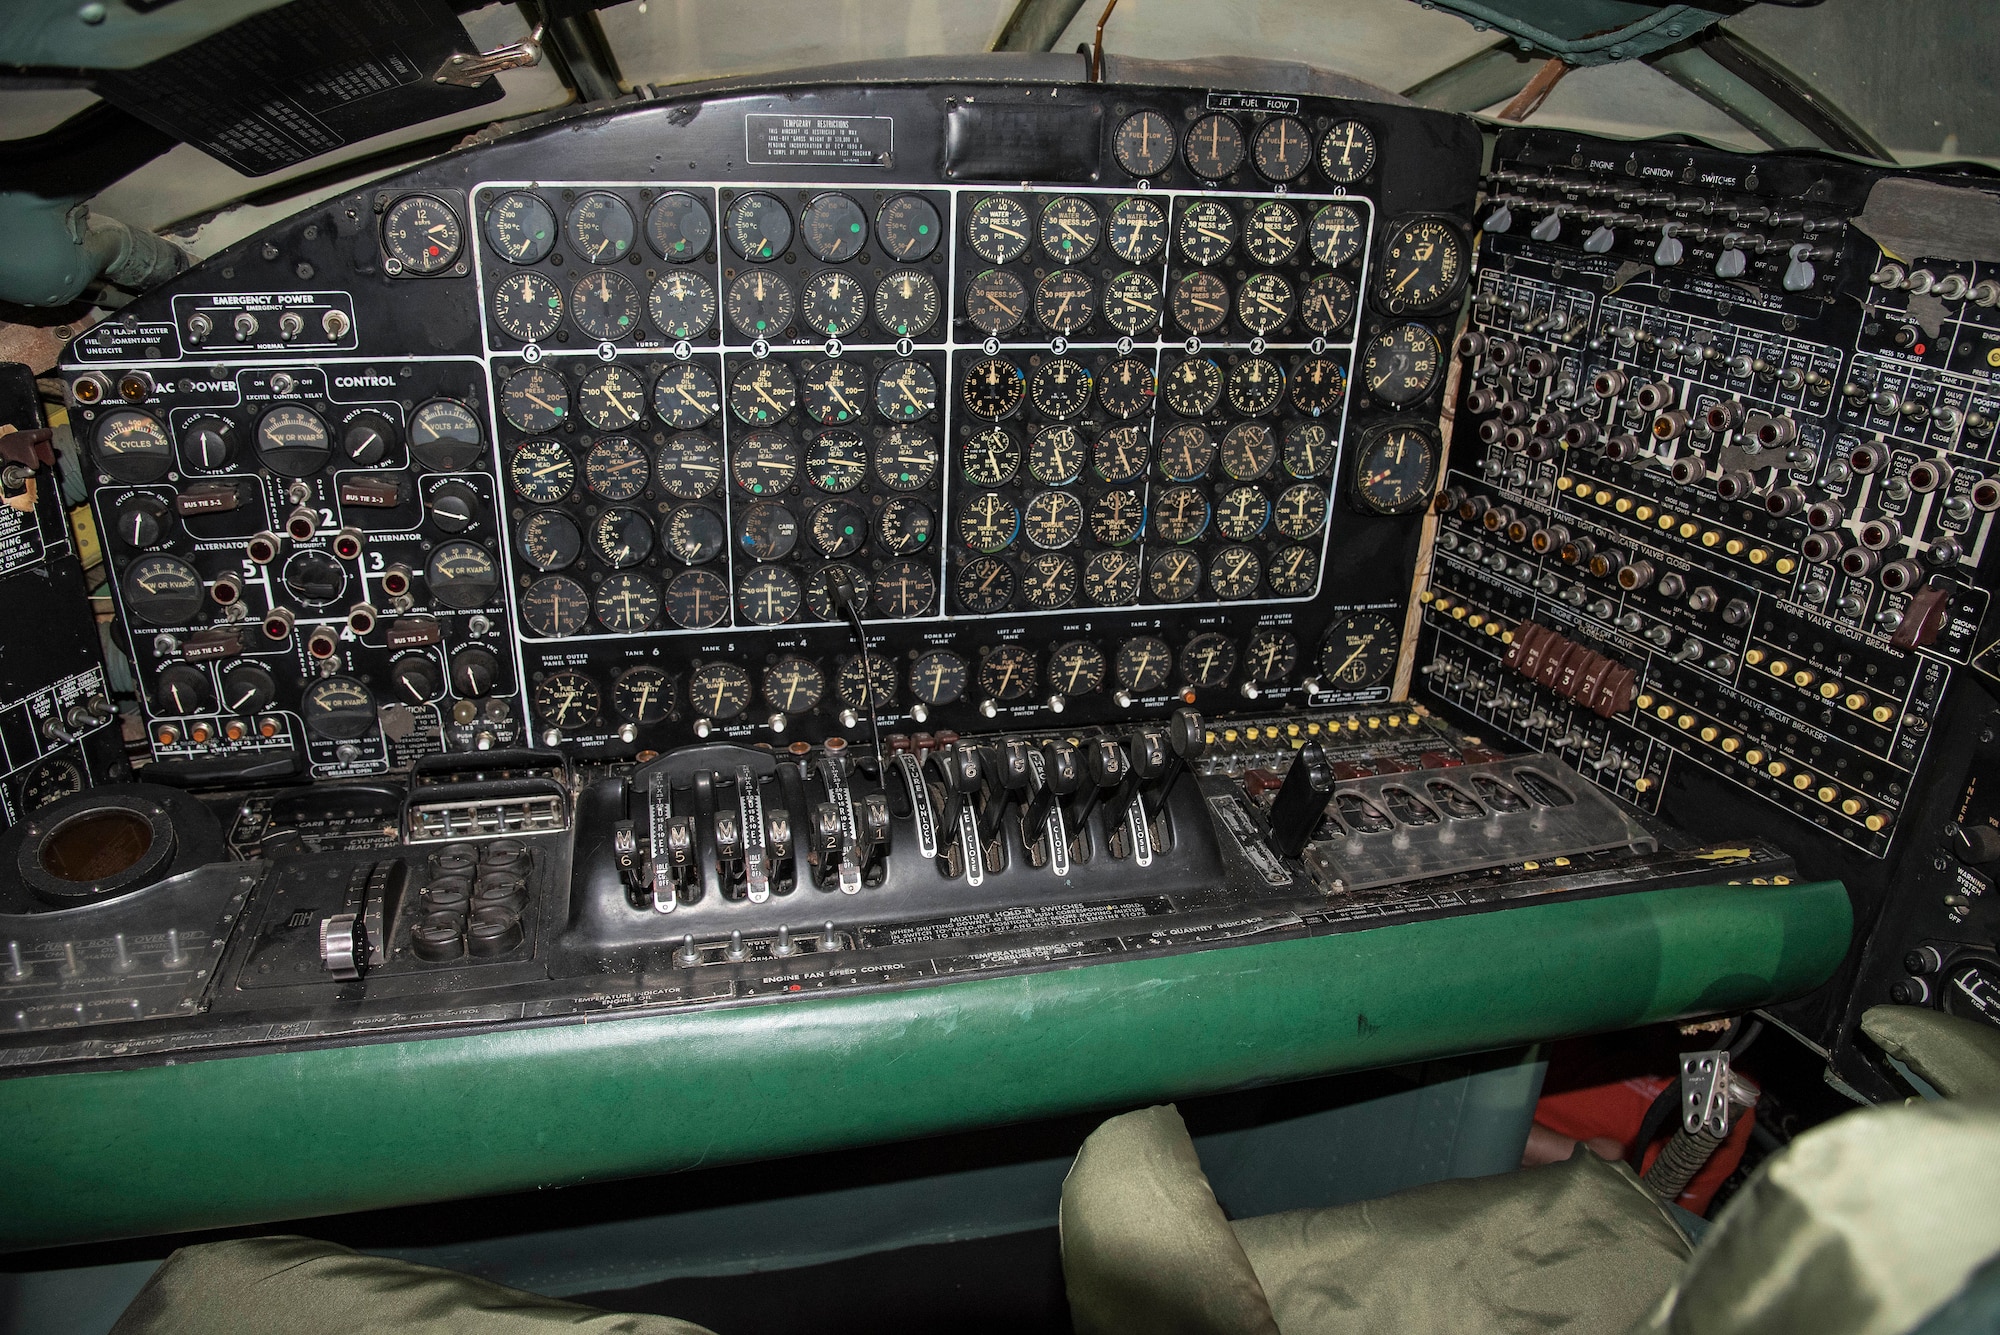 DAYTON, Ohio - Convair B-36J Peacemaker engineer station at the National Museum of the U.S. Air Force. (U.S. Air Force photo by Ken LaRock)